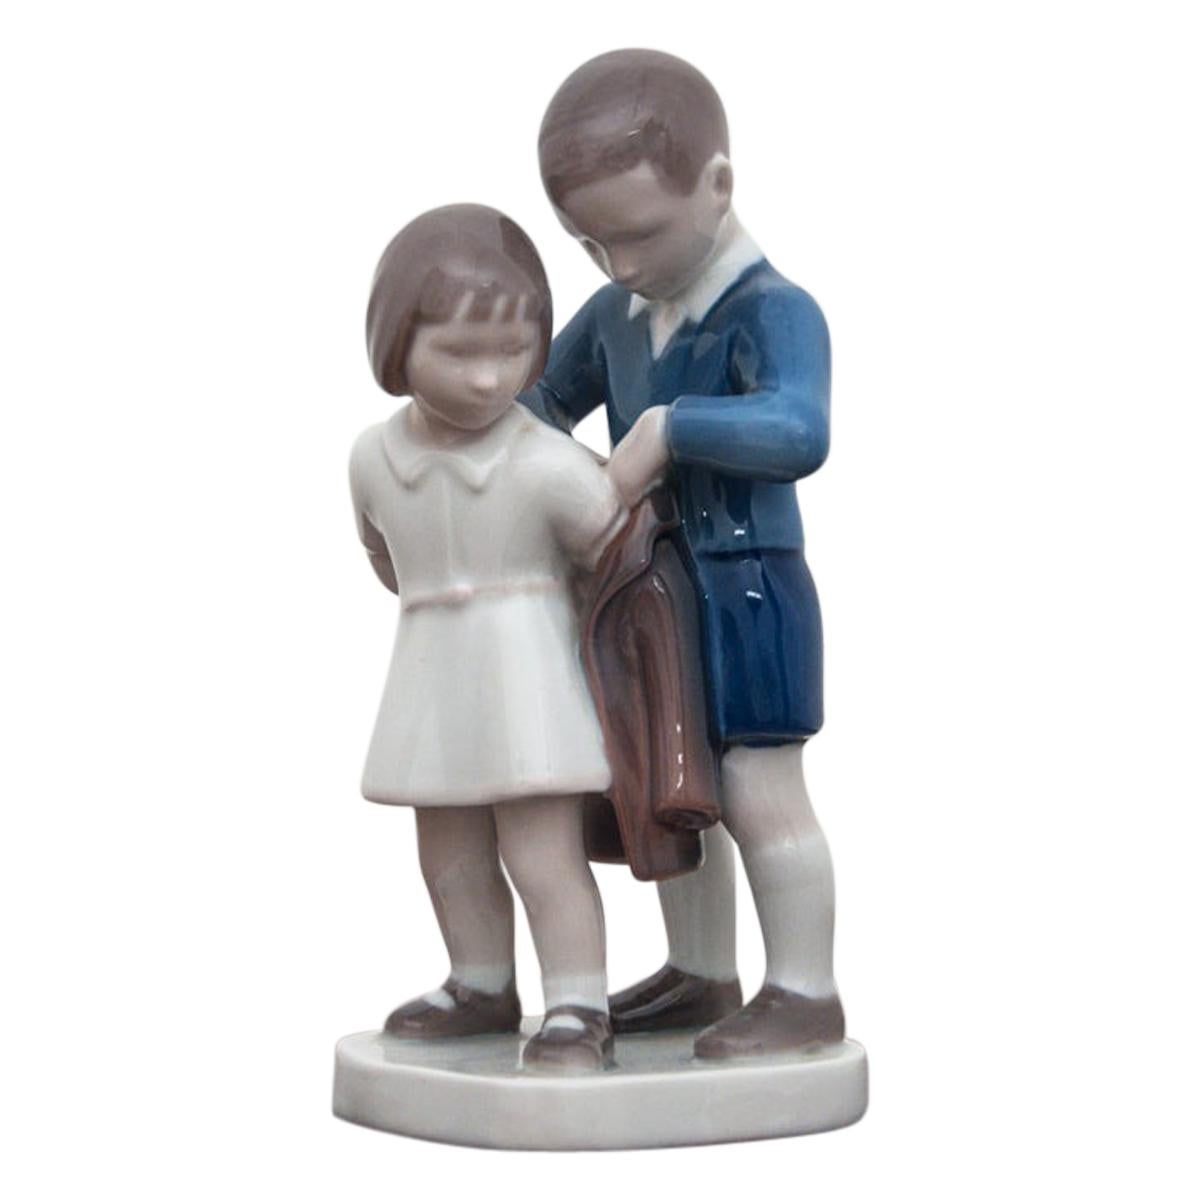 Girl with Boy Figurine from Bing & Grondhal, 1970-1983